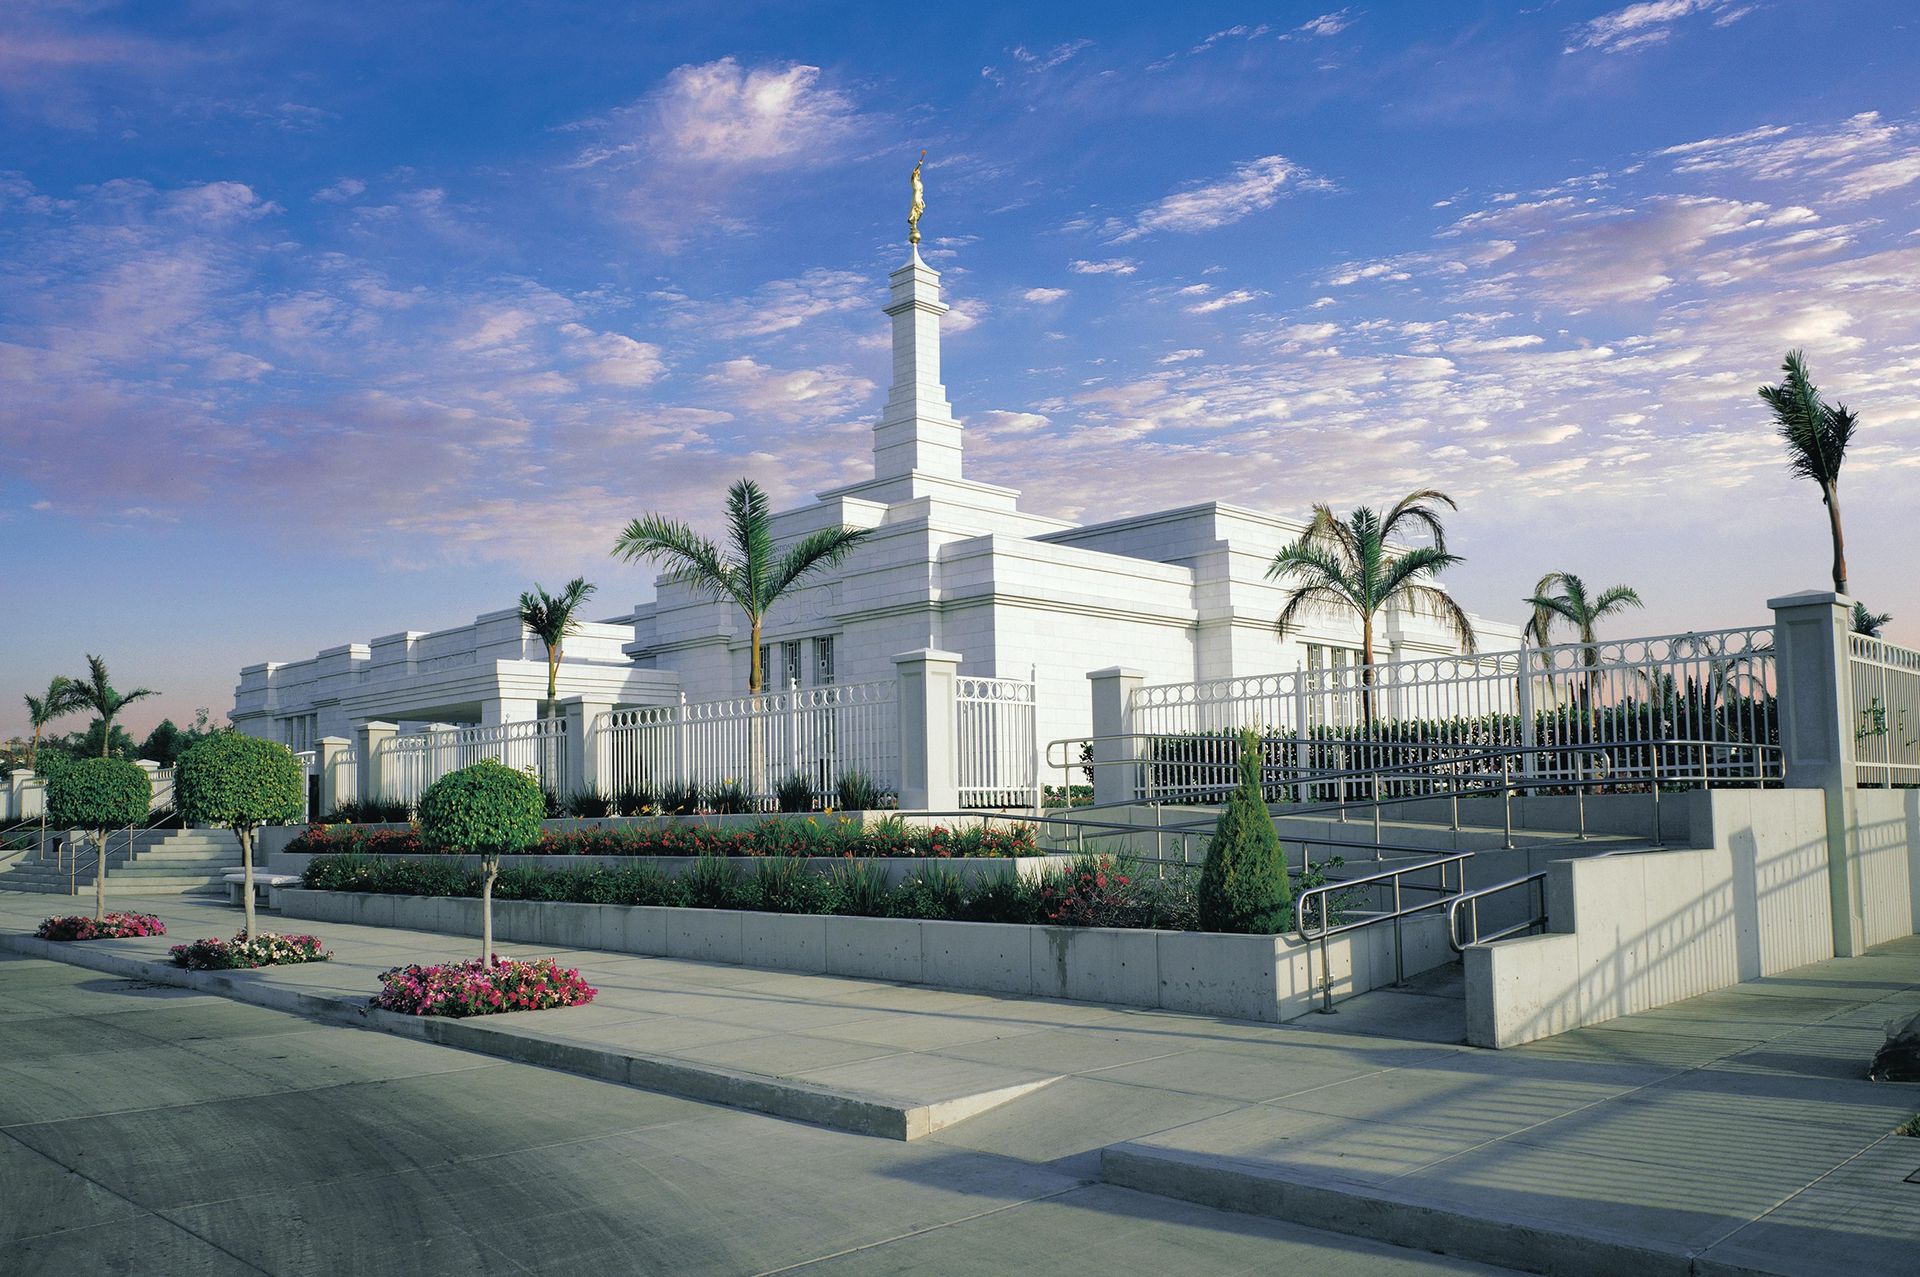 The Guadalajara Mexico Temple and grounds on a partly cloudy day.